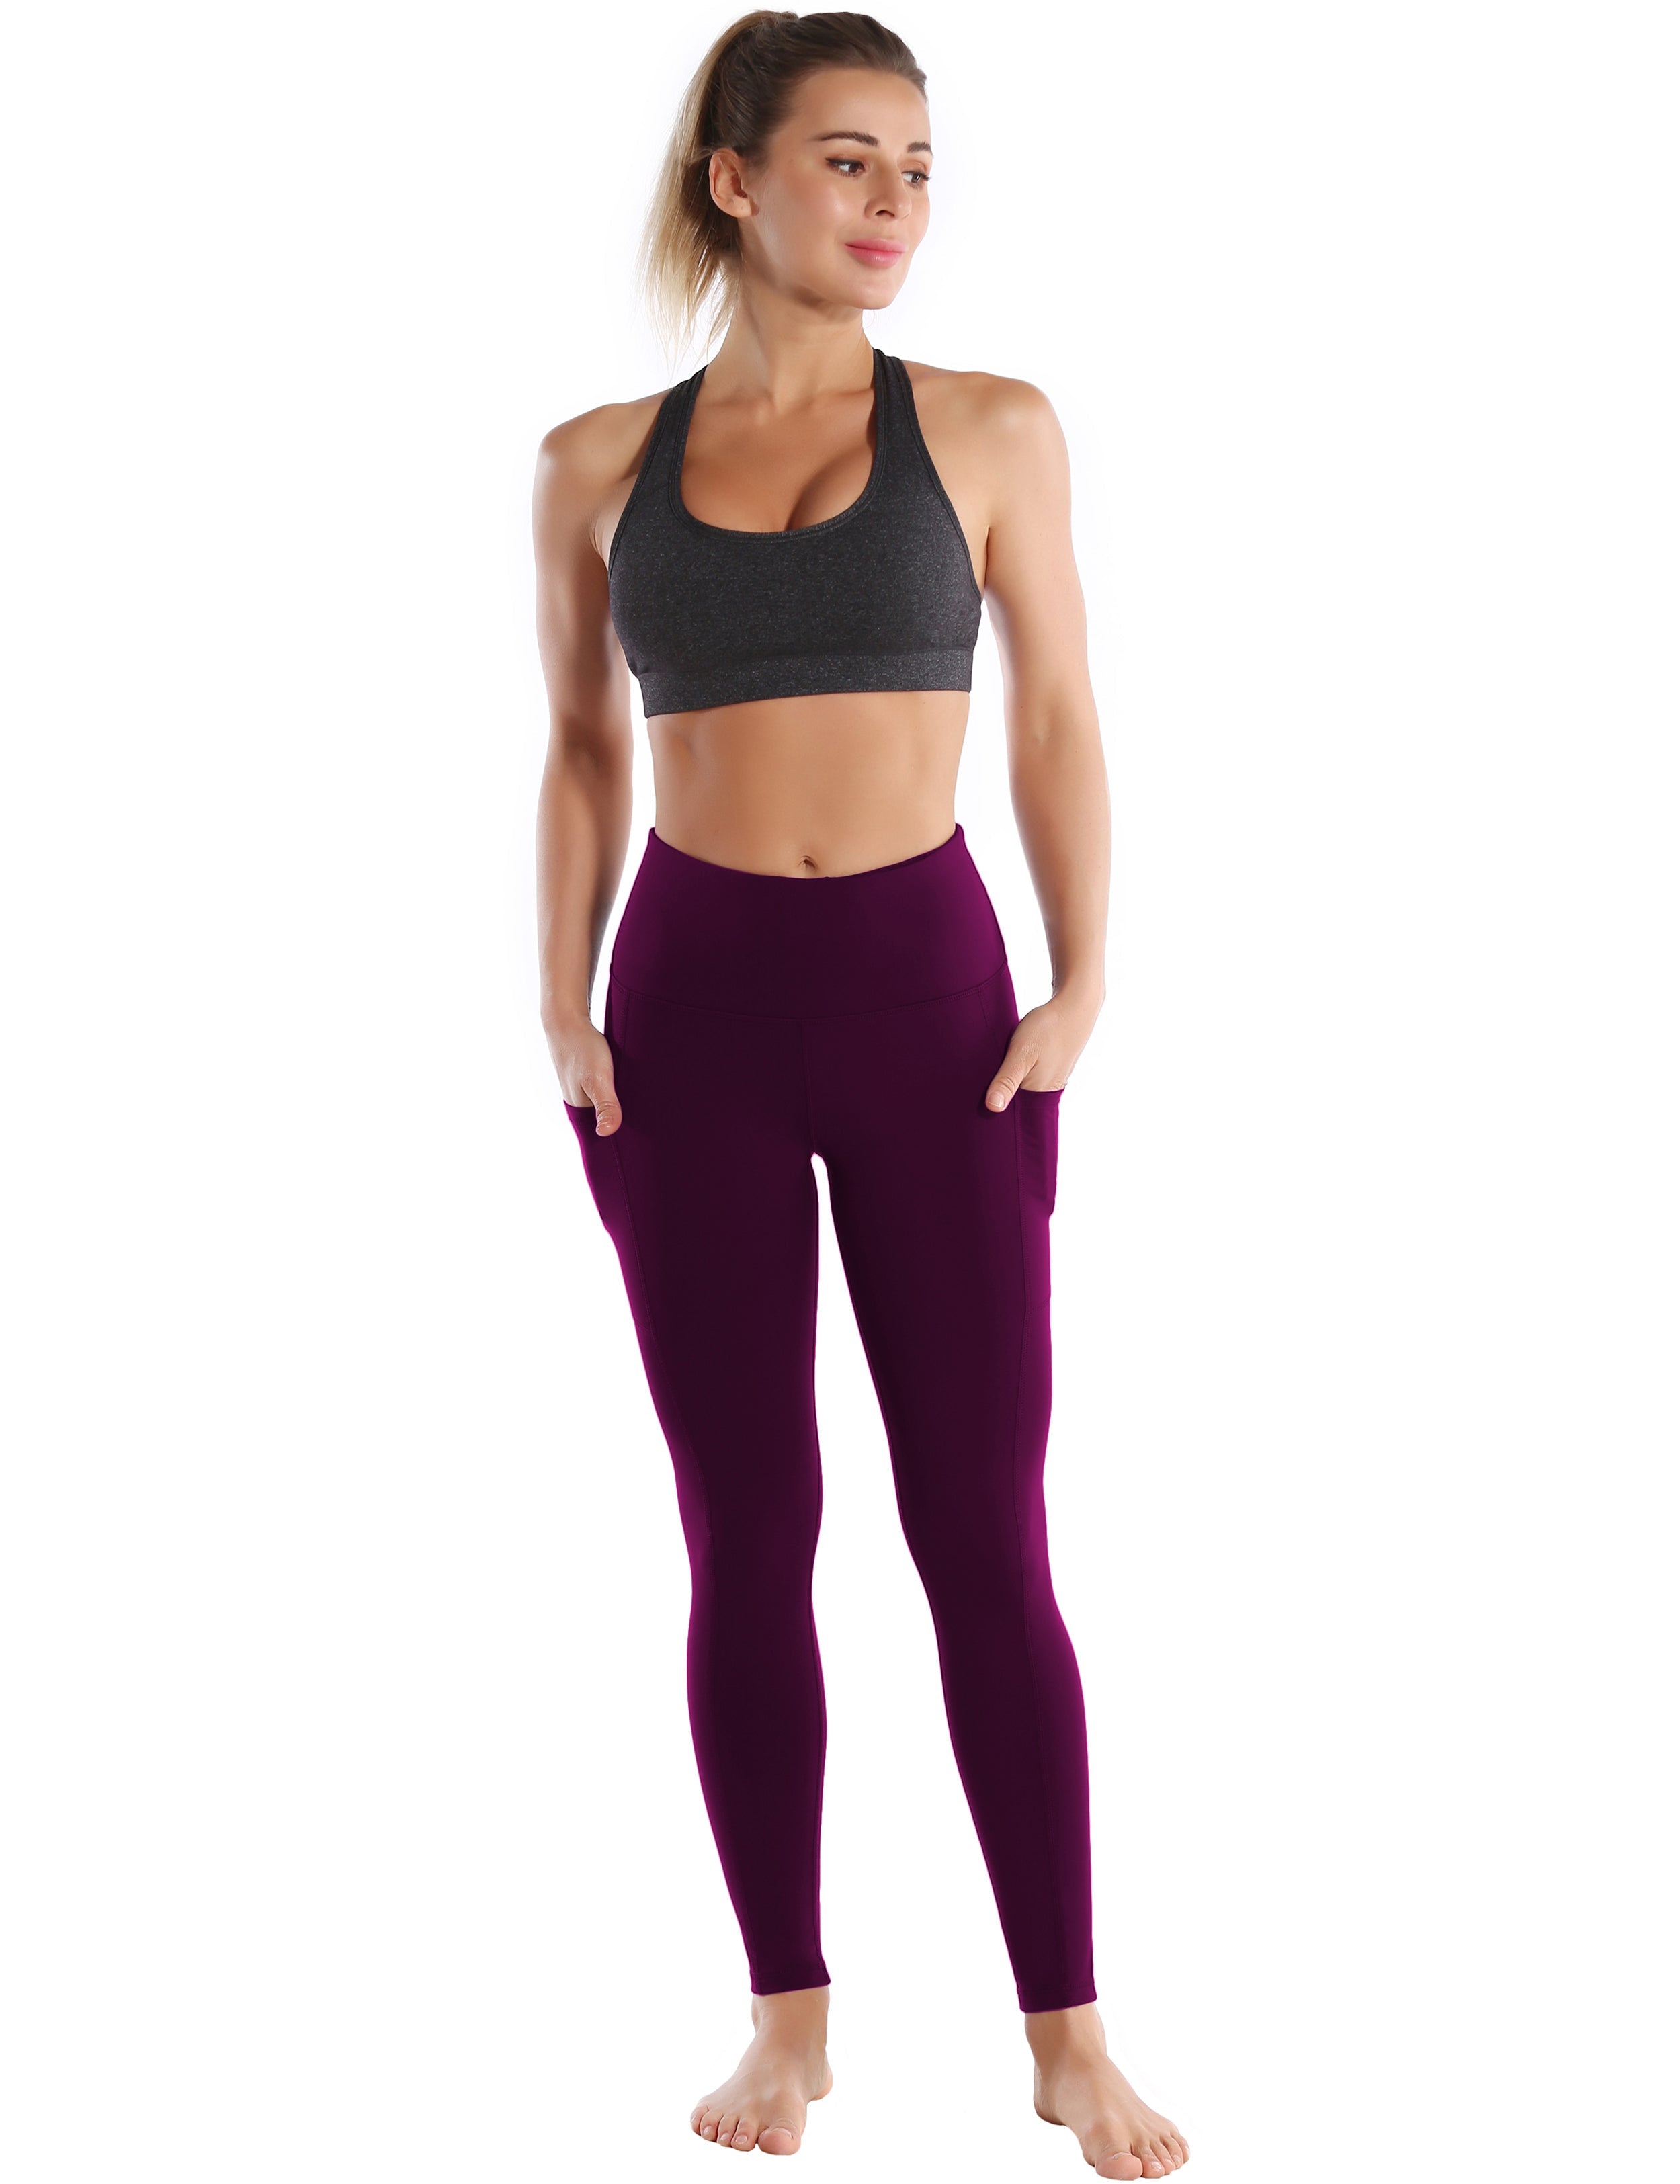 Hip Line Side Pockets Running Pants plum Sexy Hip Line Side Pockets 75%Nylon/25%Spandex Fabric doesn't attract lint easily 4-way stretch No see-through Moisture-wicking Tummy control Inner pocket Two lengths